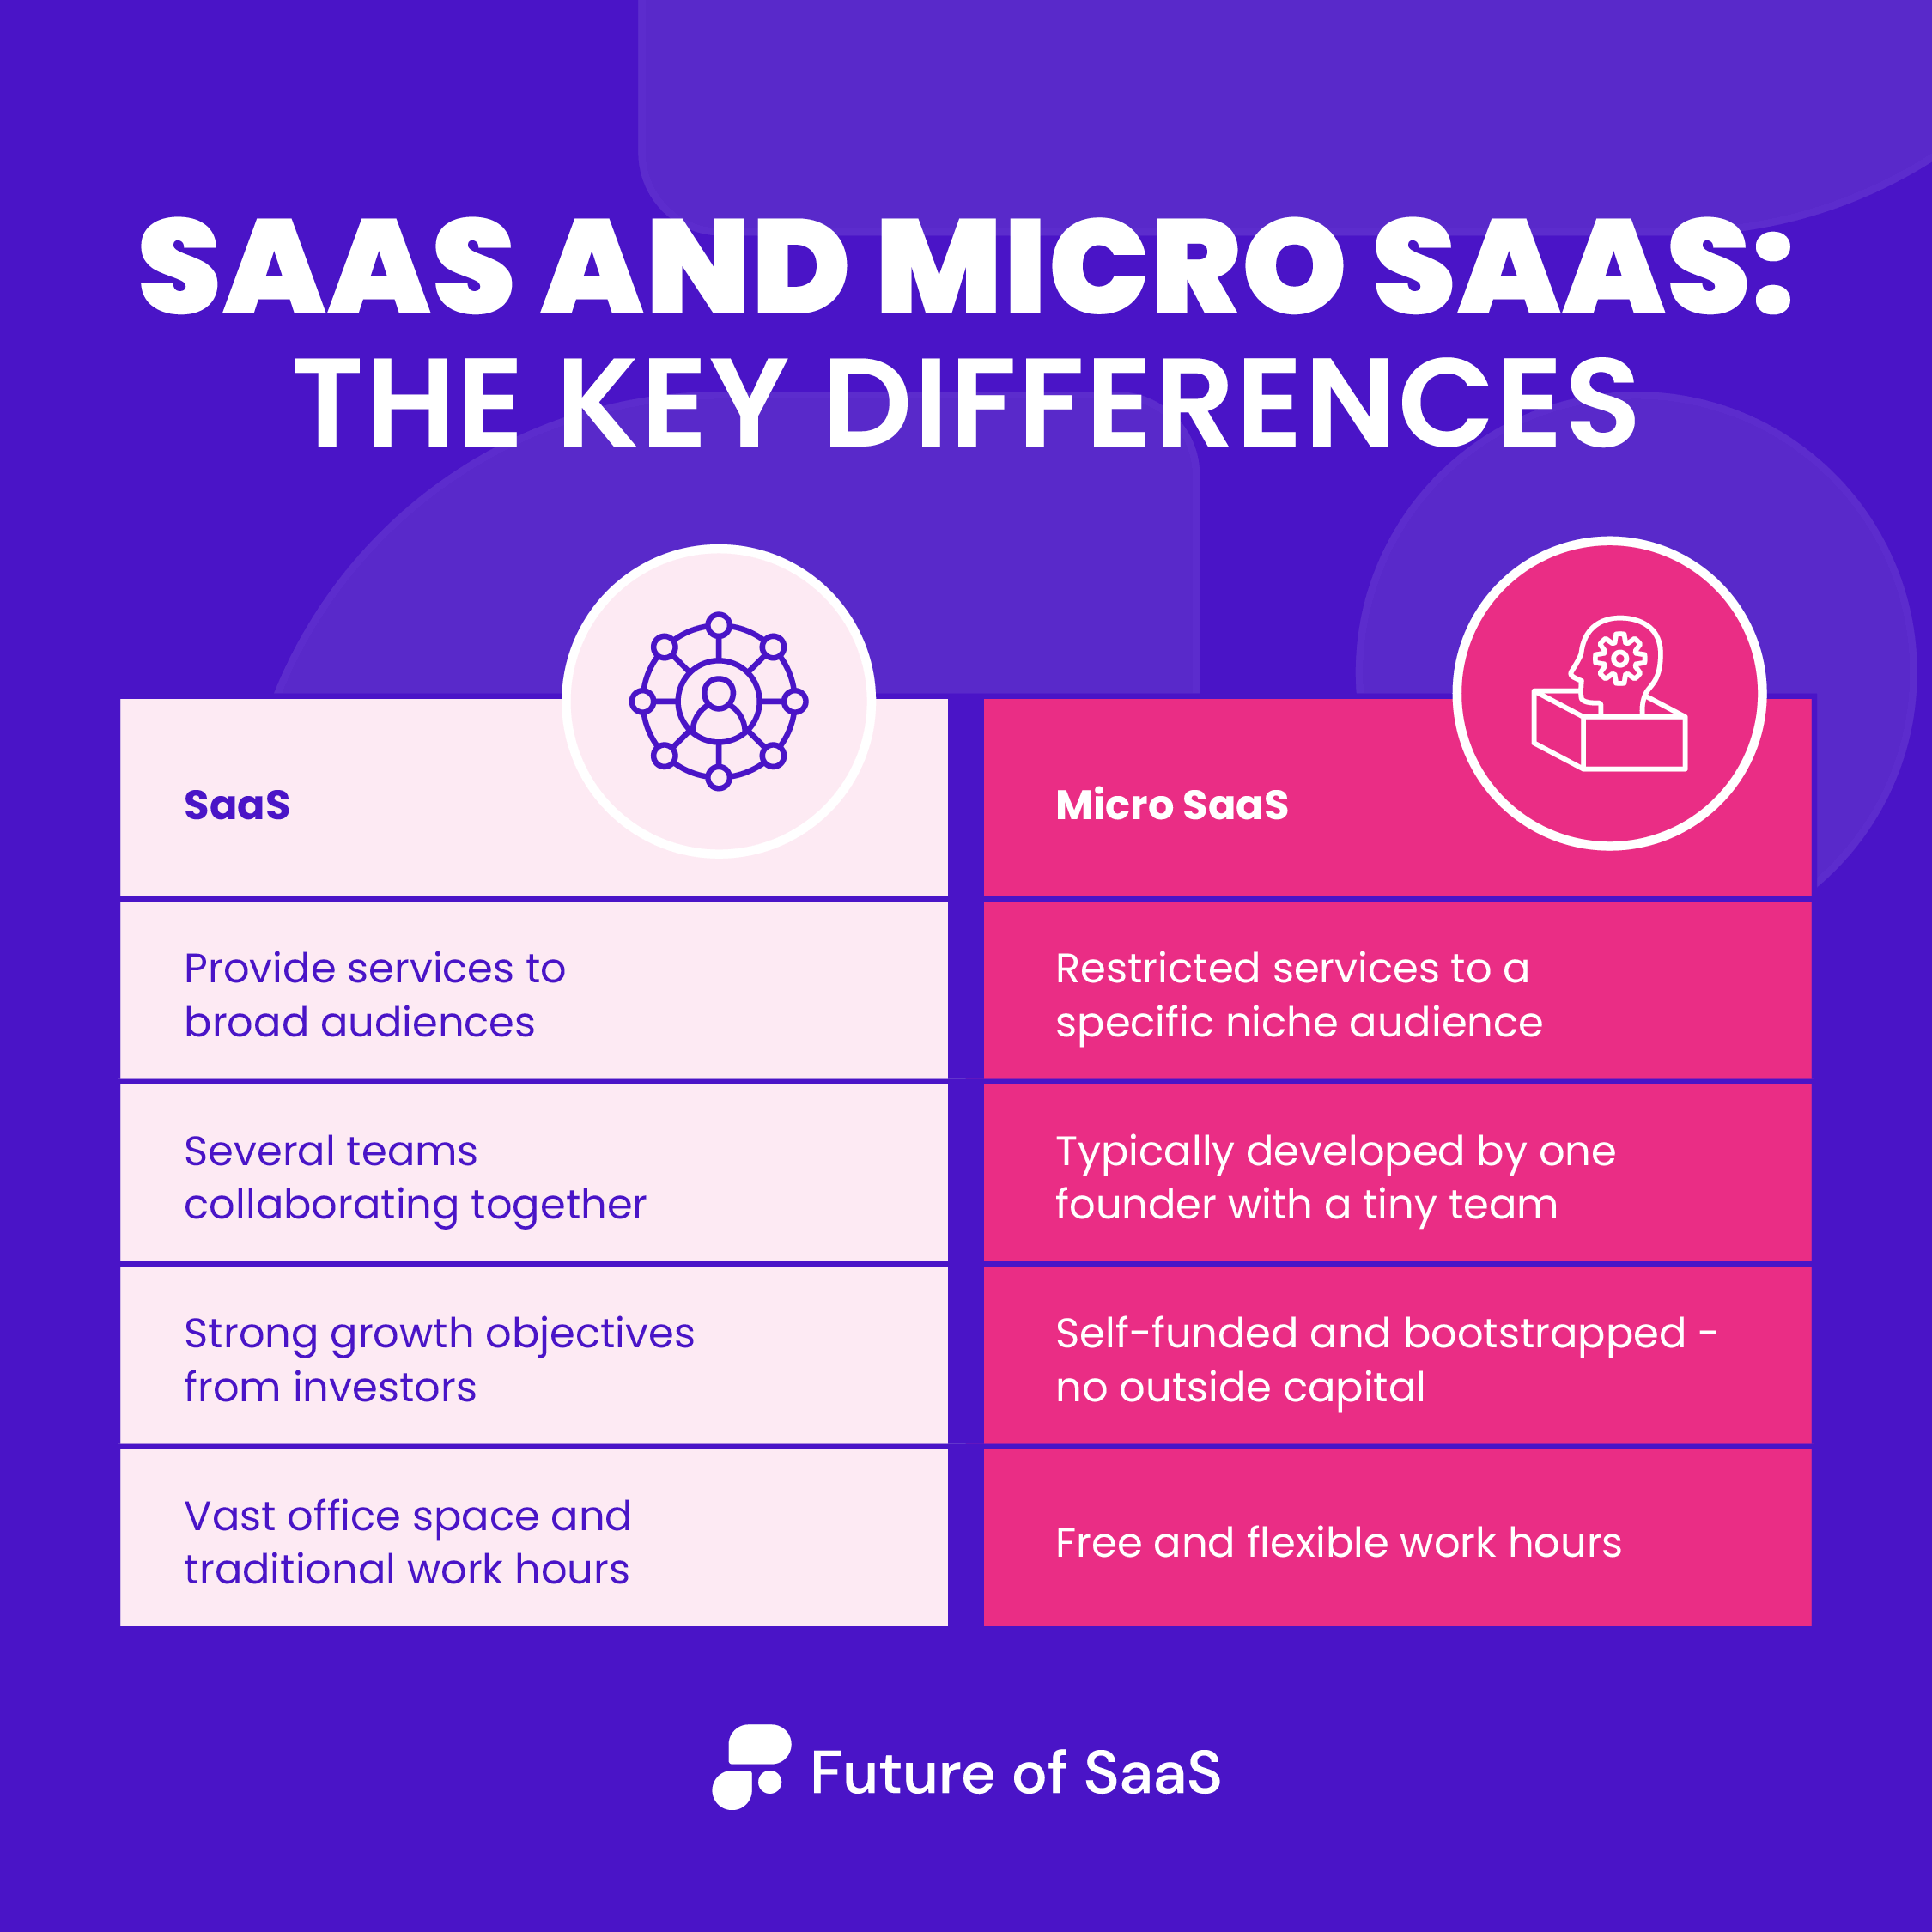 SaaS and micro SaaS: The key differences